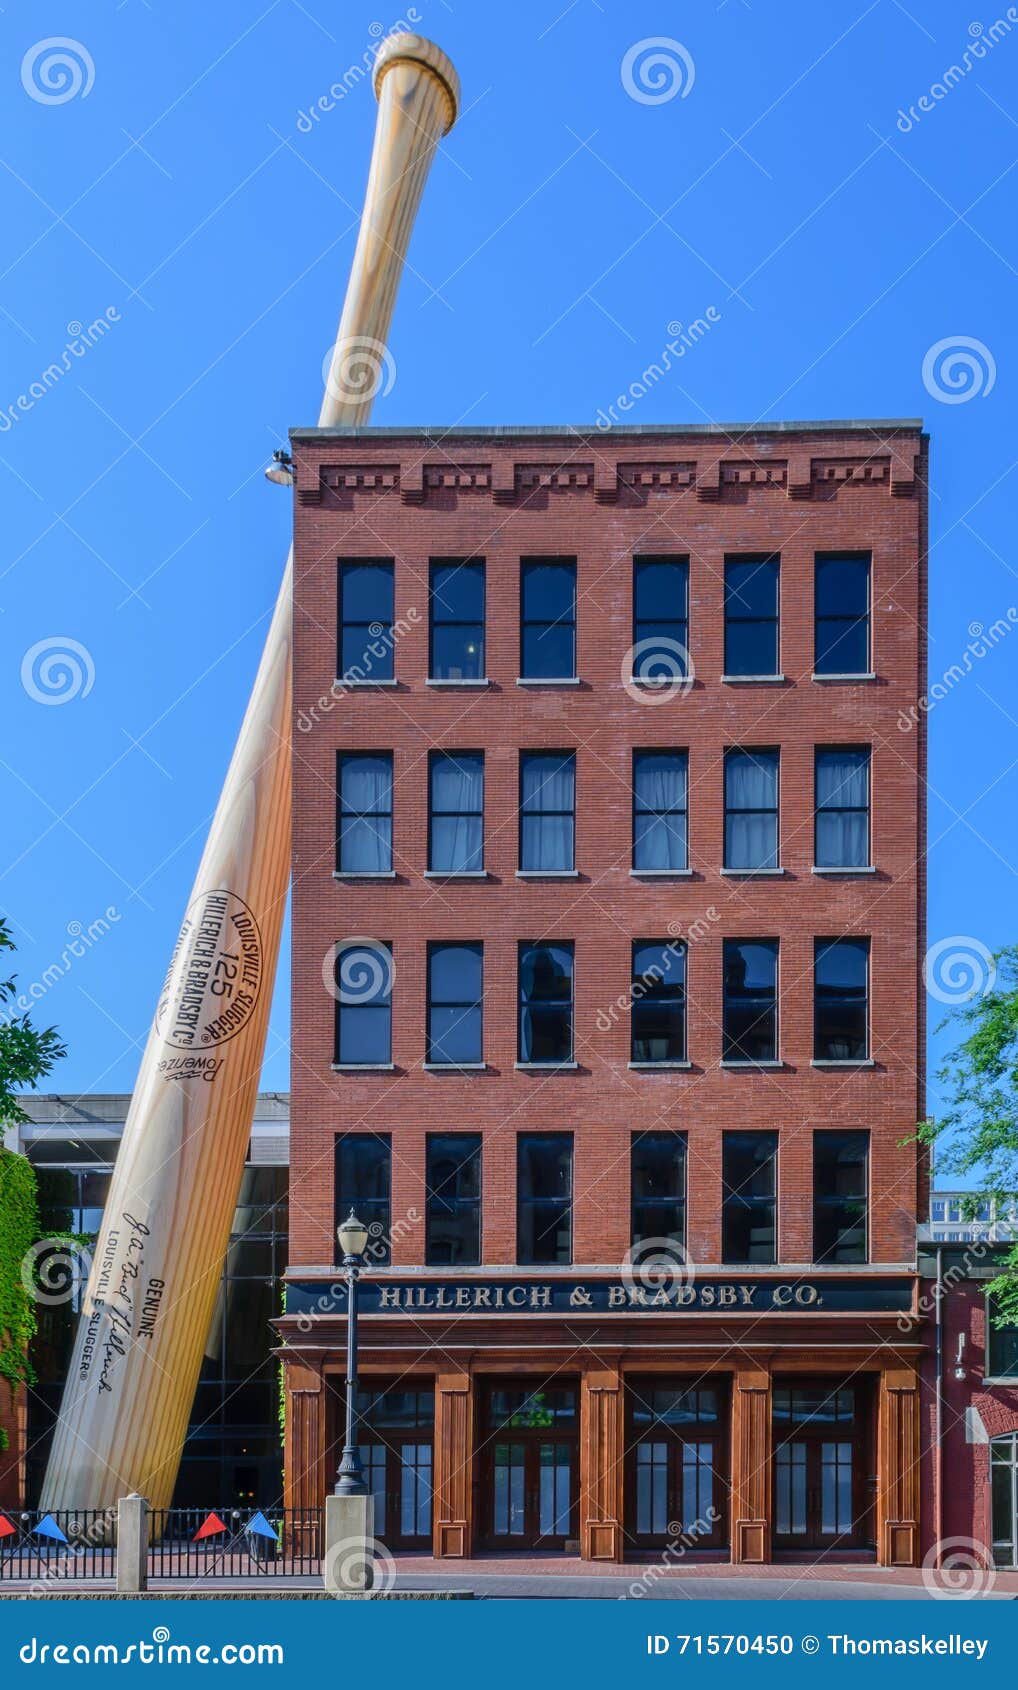 Louisville Slugger Museum & Factory Editorial Image - Image of city, derby: 71570450